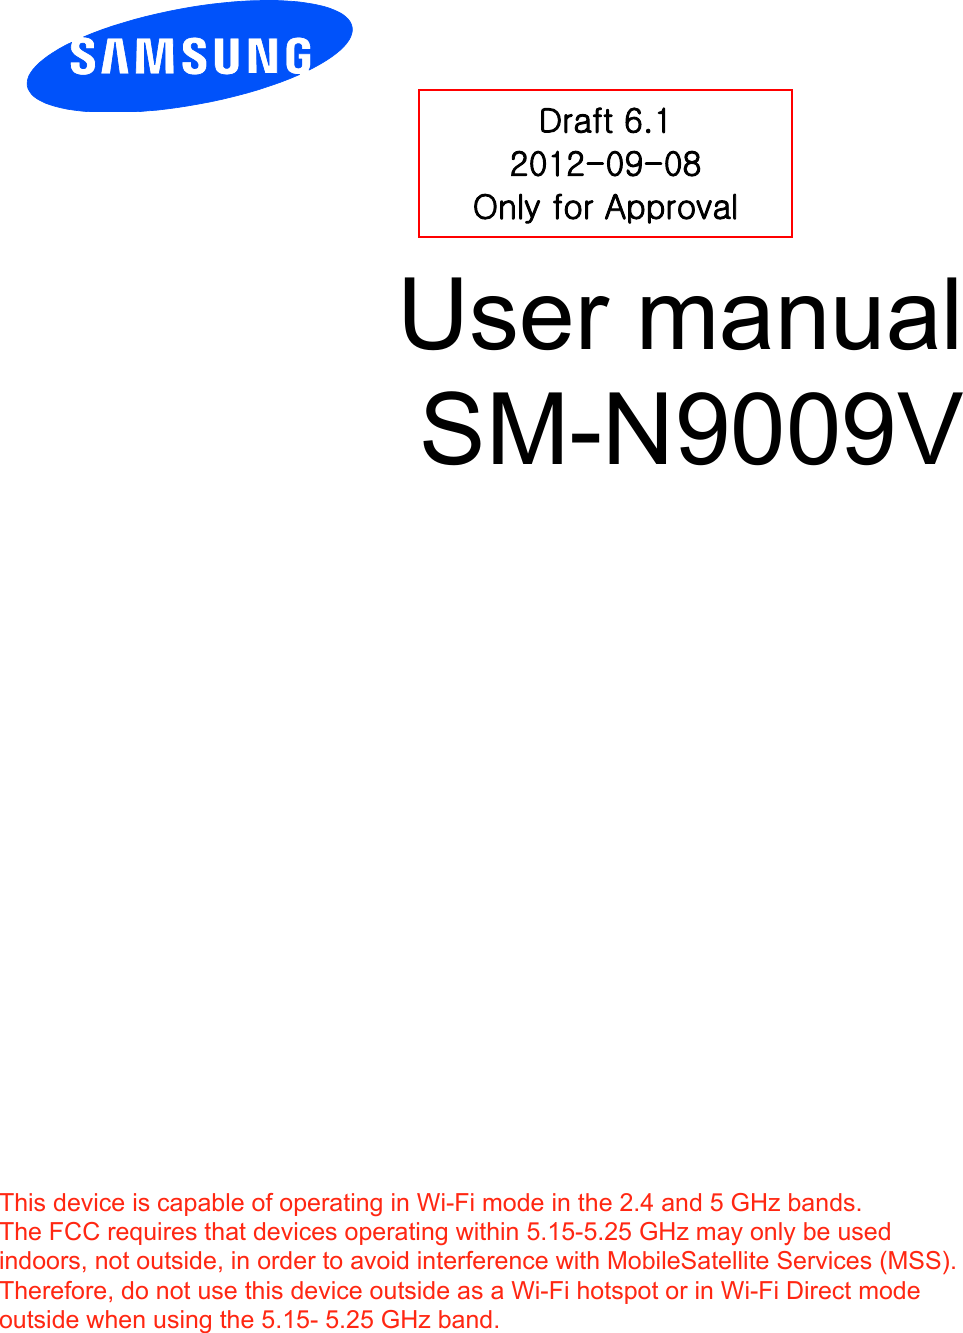          User manual SM-N9009V           Draft 6.1 2012-09-08 Only for Approval This device is capable of operating in Wi-Fi mode in the 2.4 and 5 GHz bands. The FCC requires that devices operating within 5.15-5.25 GHz may only be used indoors, not outside, in order to avoid interference with MobileSatellite Services (MSS). Therefore, do not use this device outside as a Wi-Fi hotspot or in Wi-Fi Direct mode outside when using the 5.15- 5.25 GHz band.